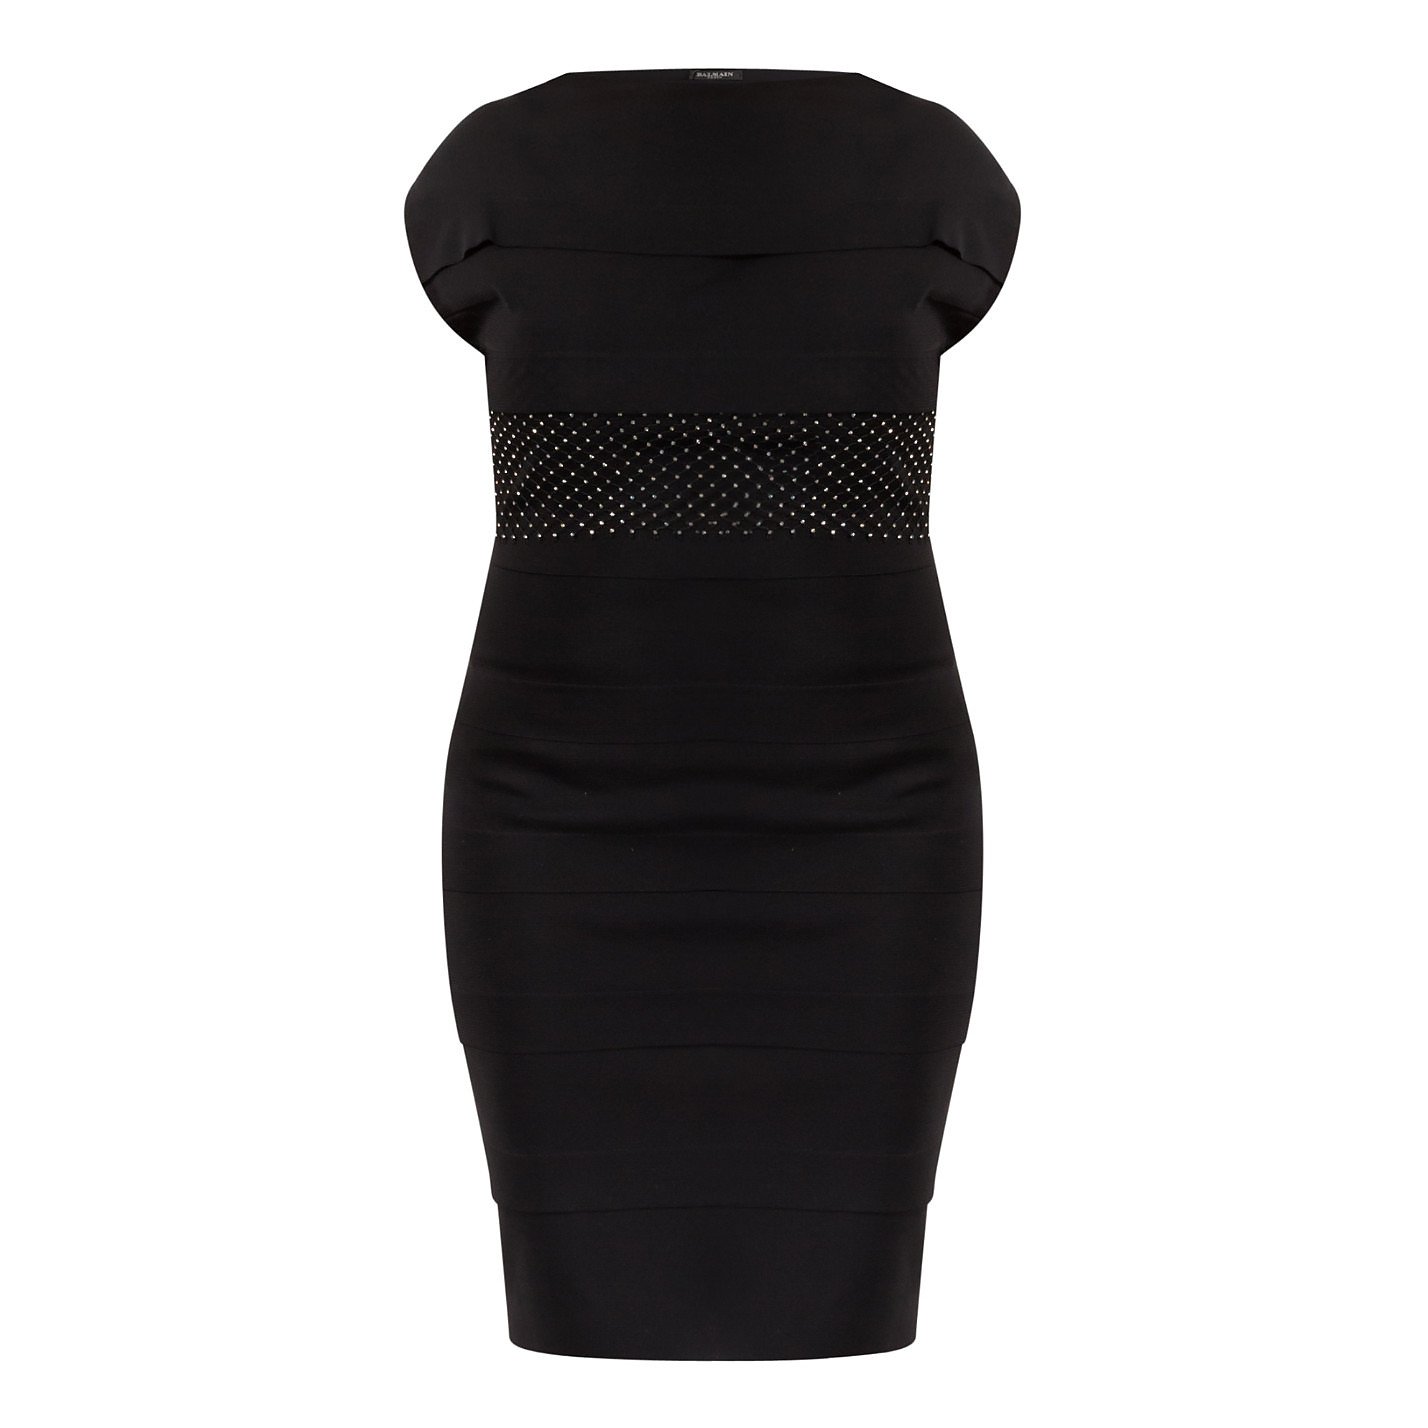 Balmain Ribbed Dress with Netted Diamanté Panel